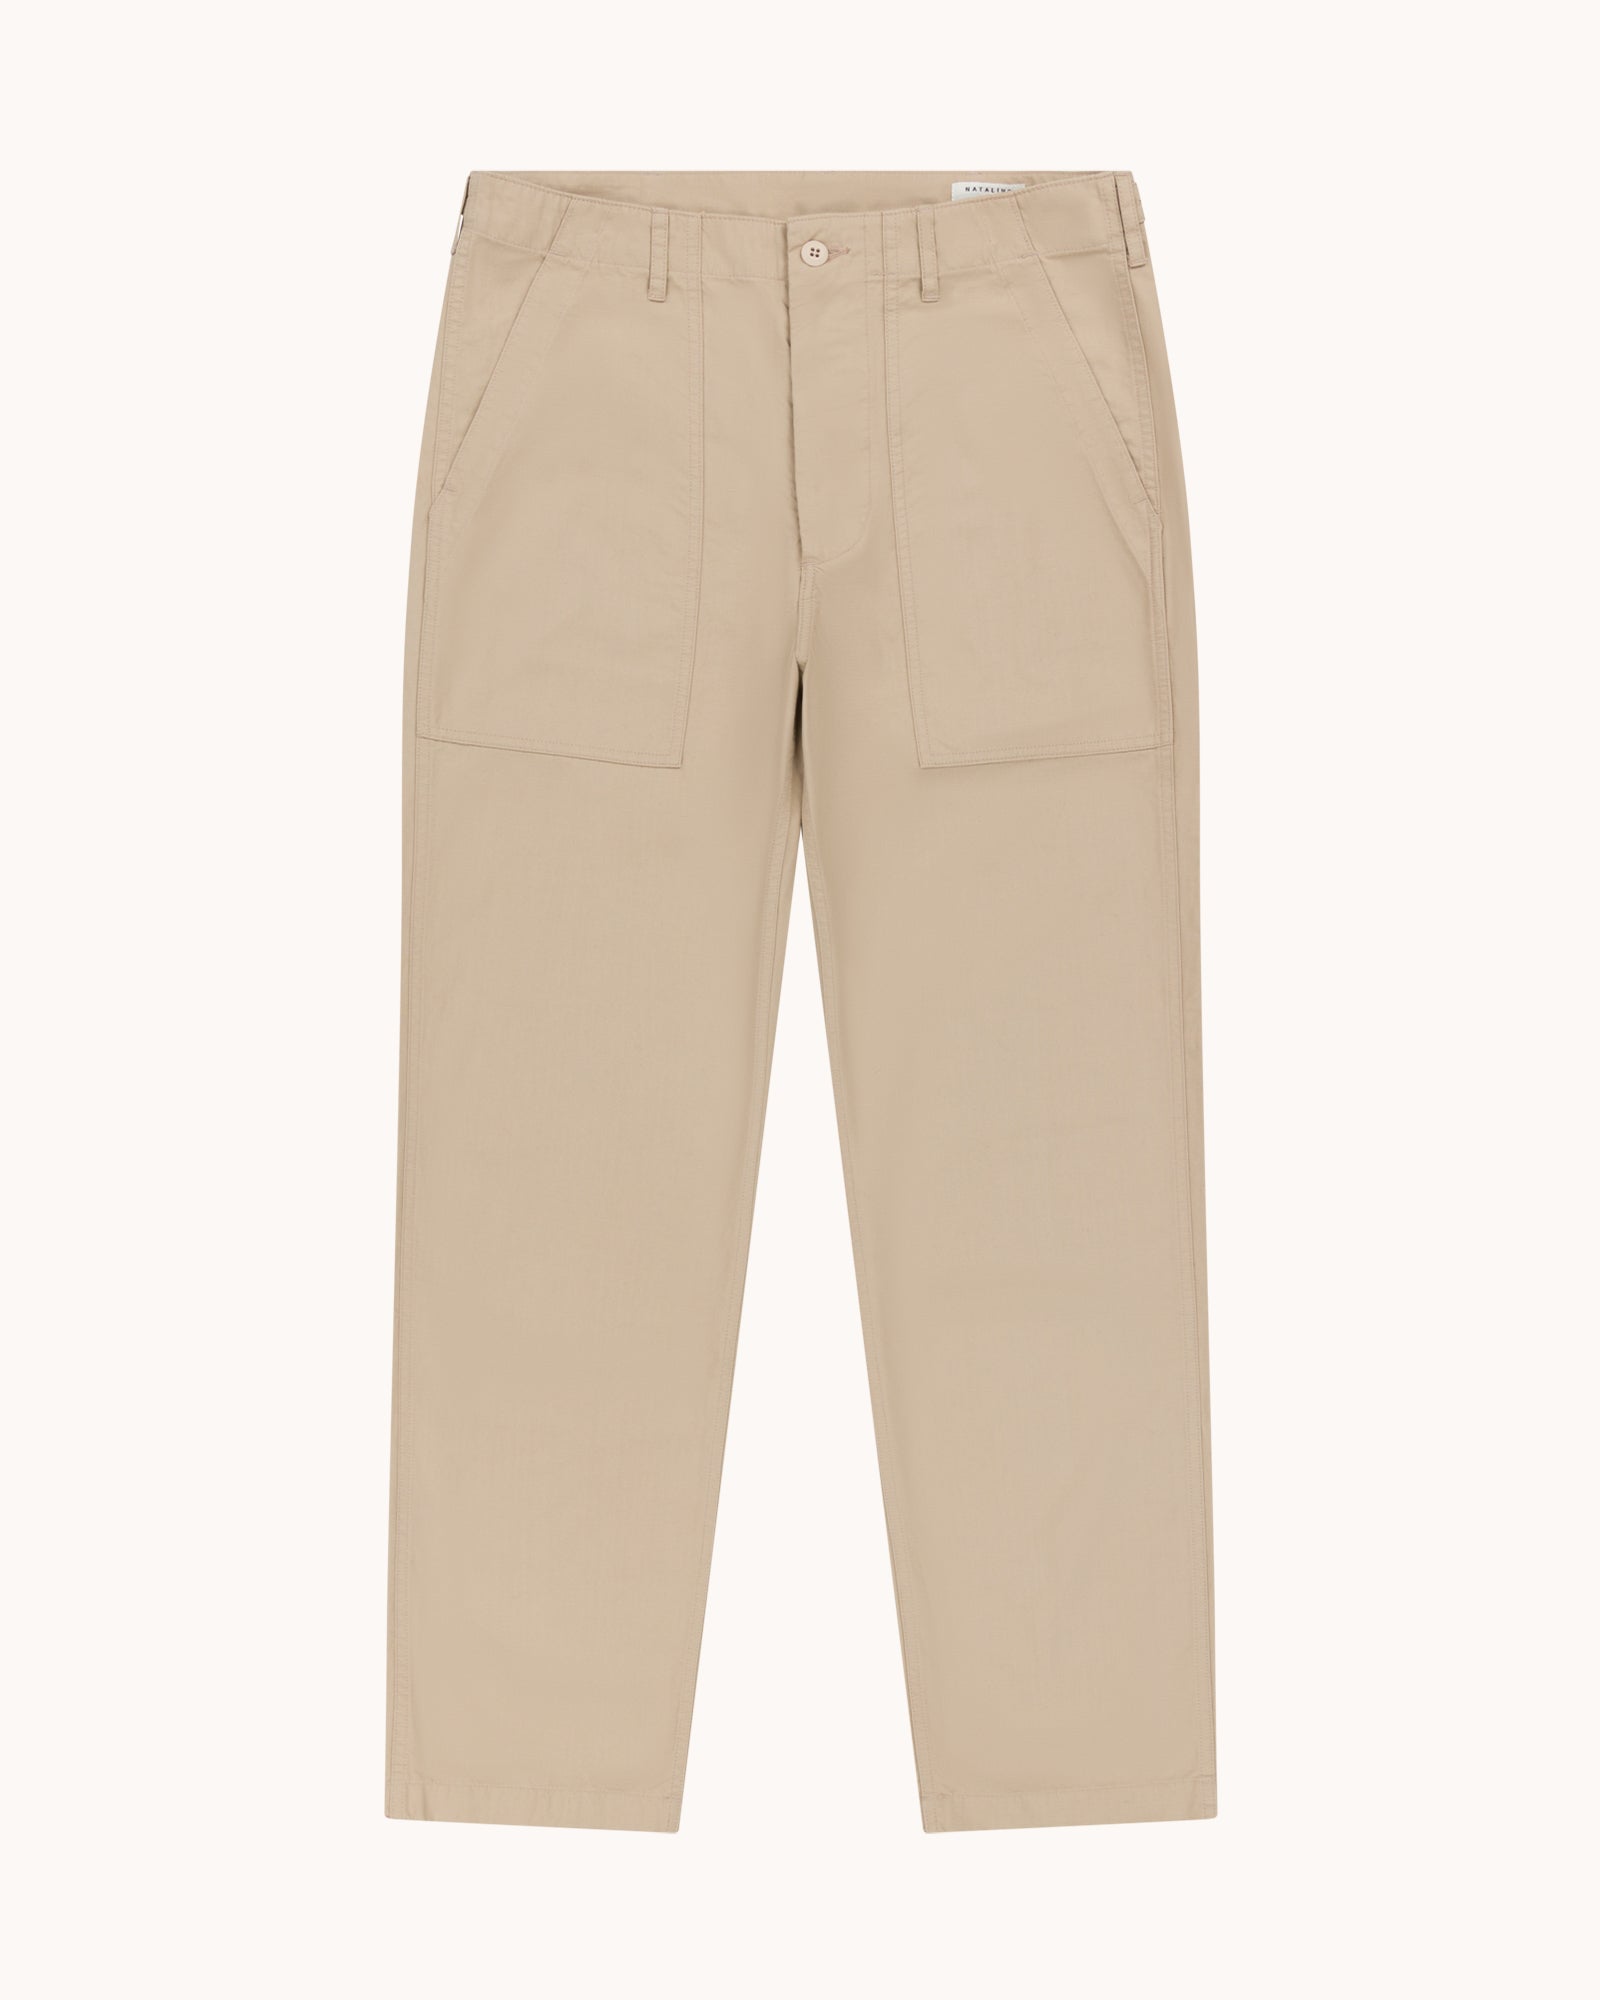 High Rise Japanese Ripstop Fatigue Pant - Beige